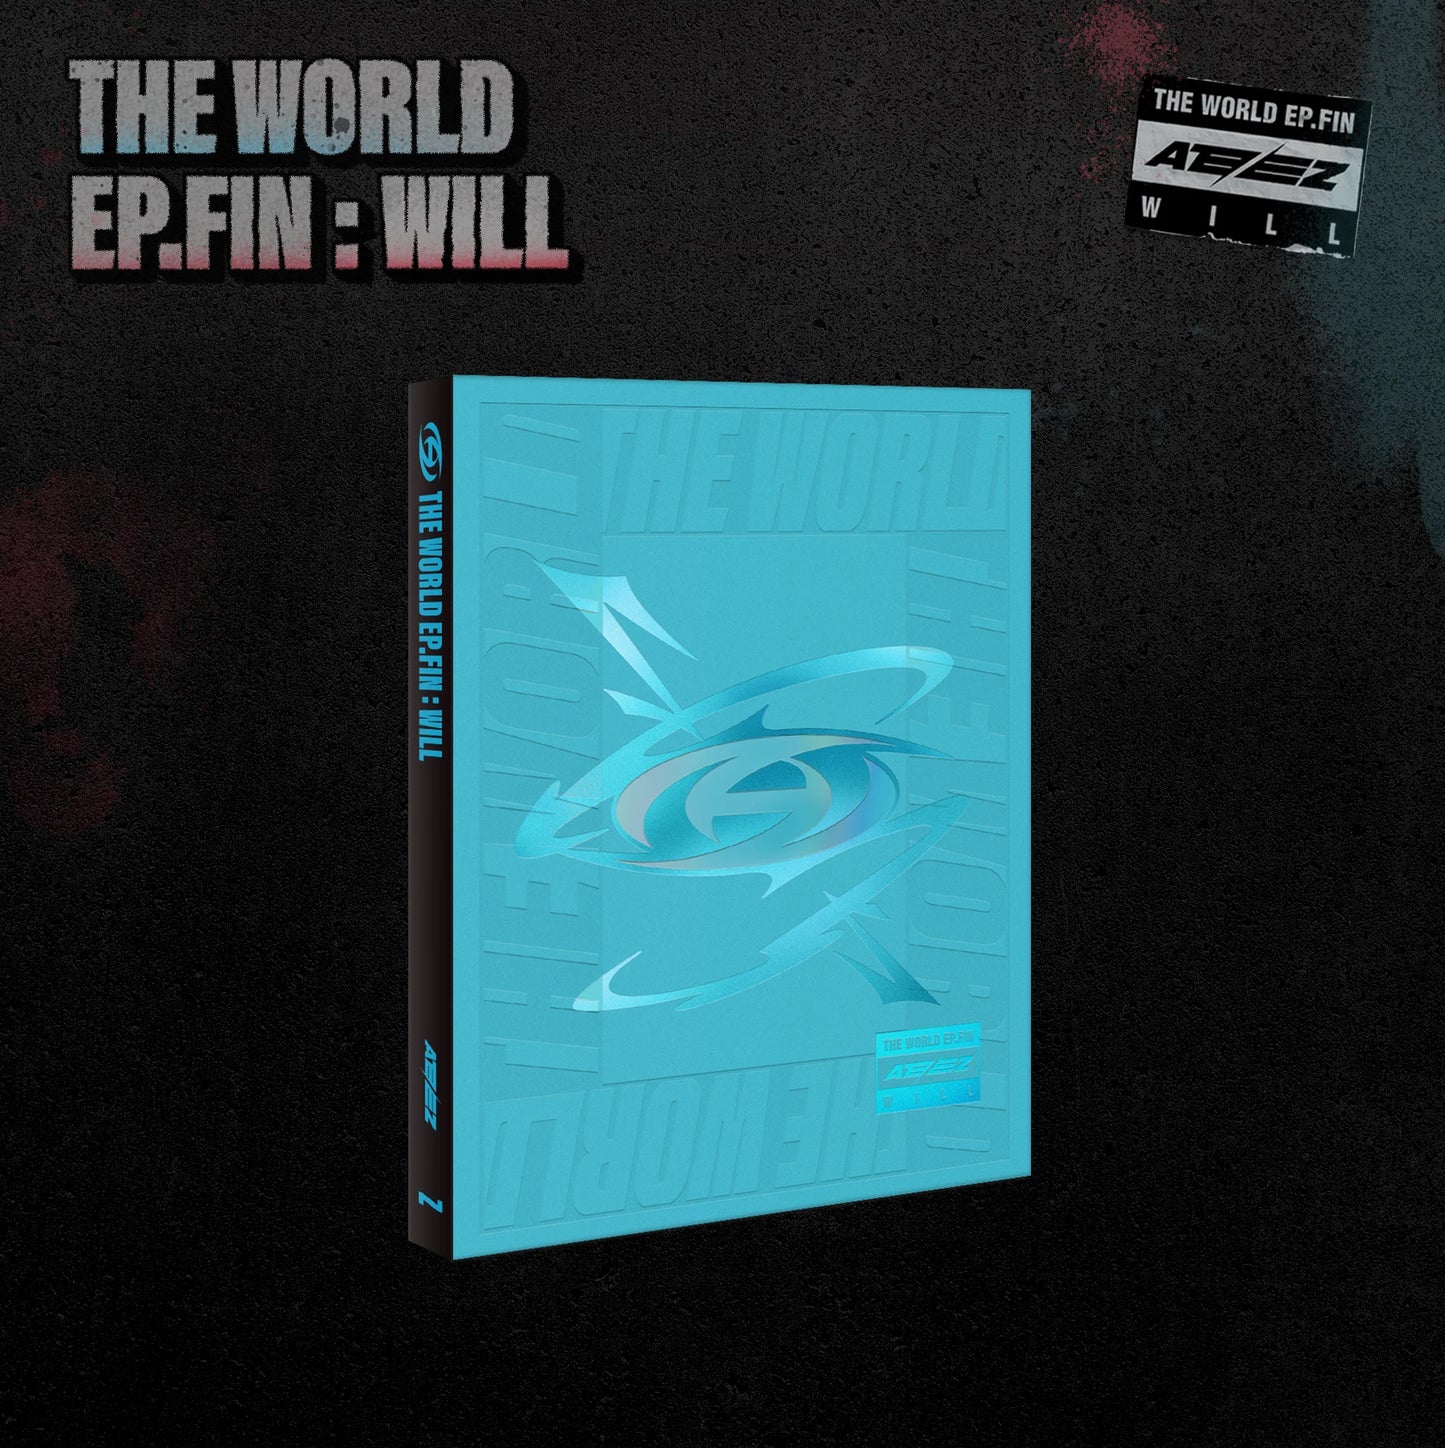 ATEEZ [THE WORLD EP.FIN : WILL]